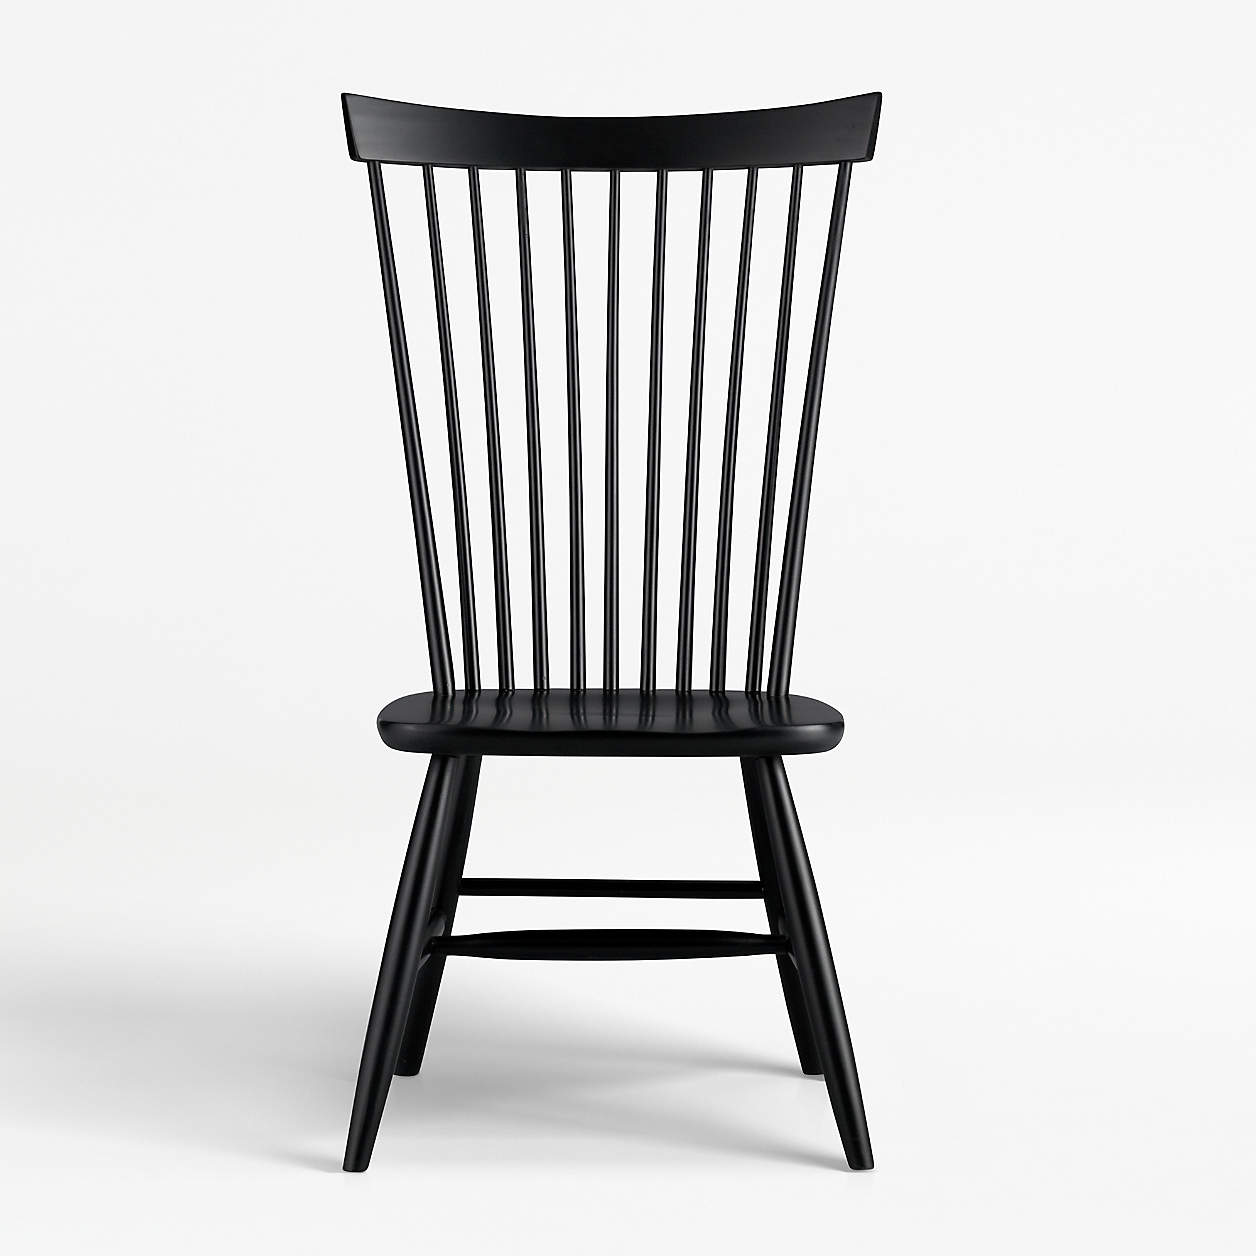 Shop Marlow II Black Maple Dining Chair + Reviews | Crate and Barrel from Crate and Barrel on Openhaus